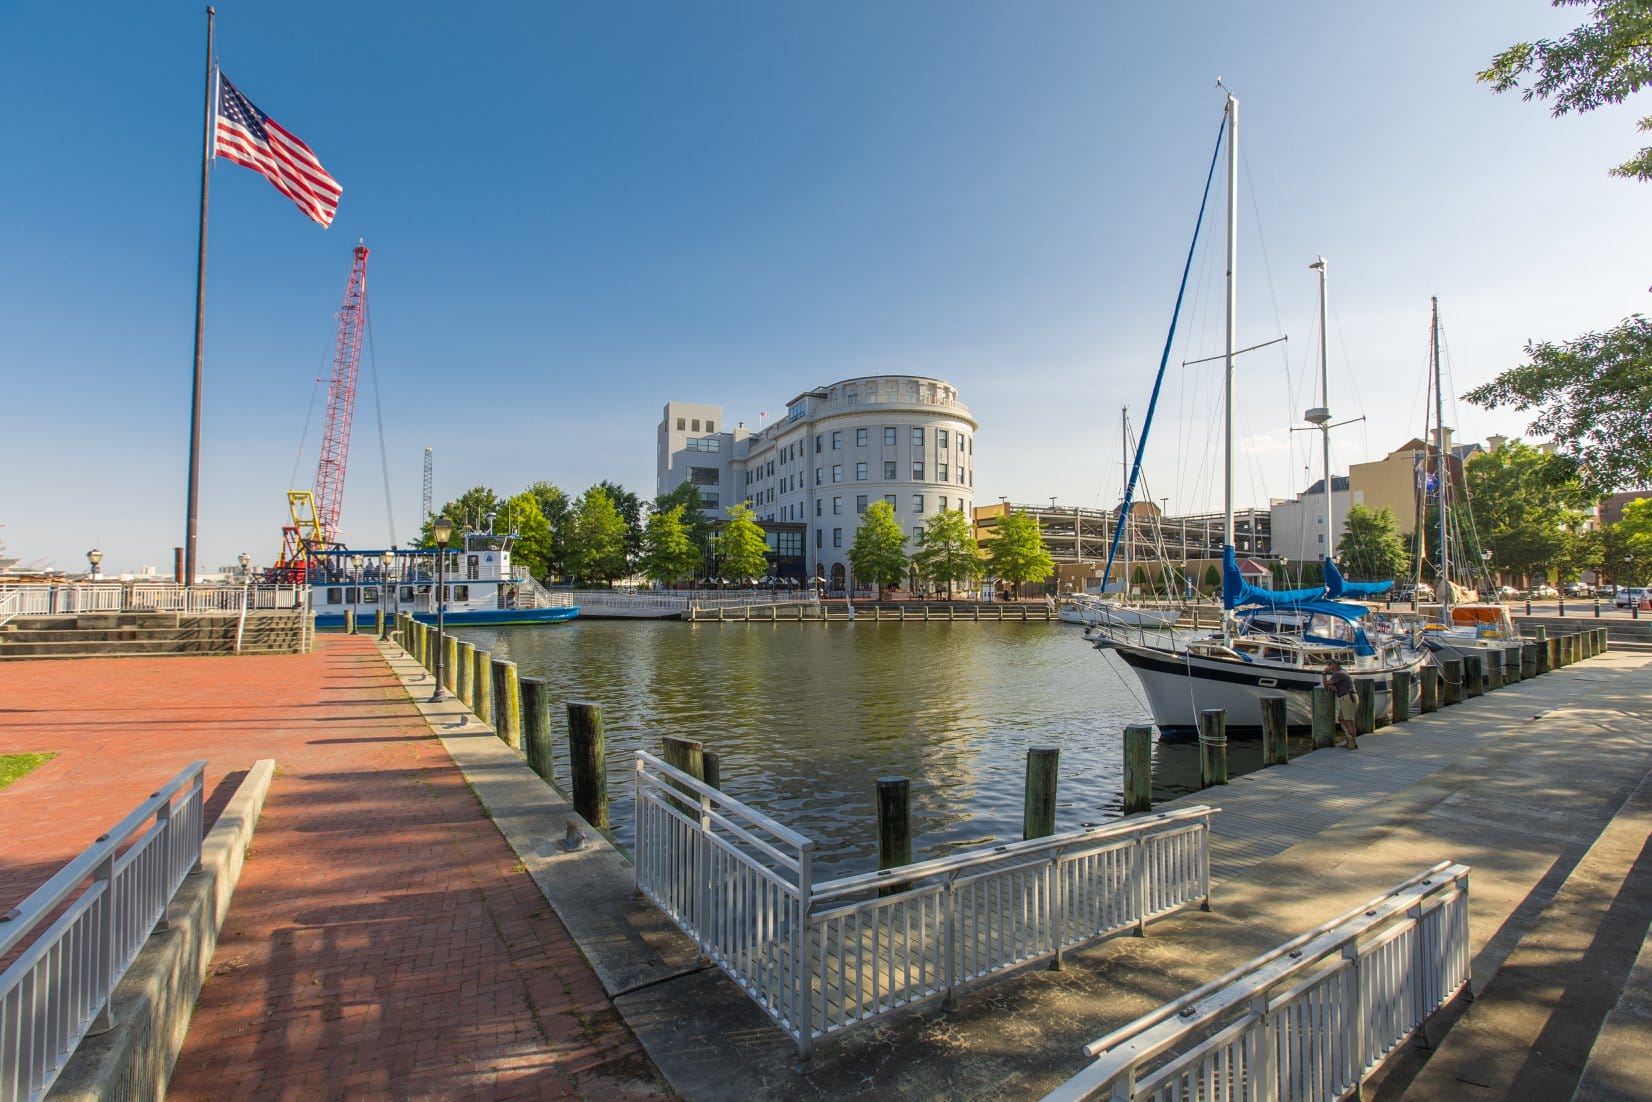 A view of the Elizabeth River in downtown Portsmouth